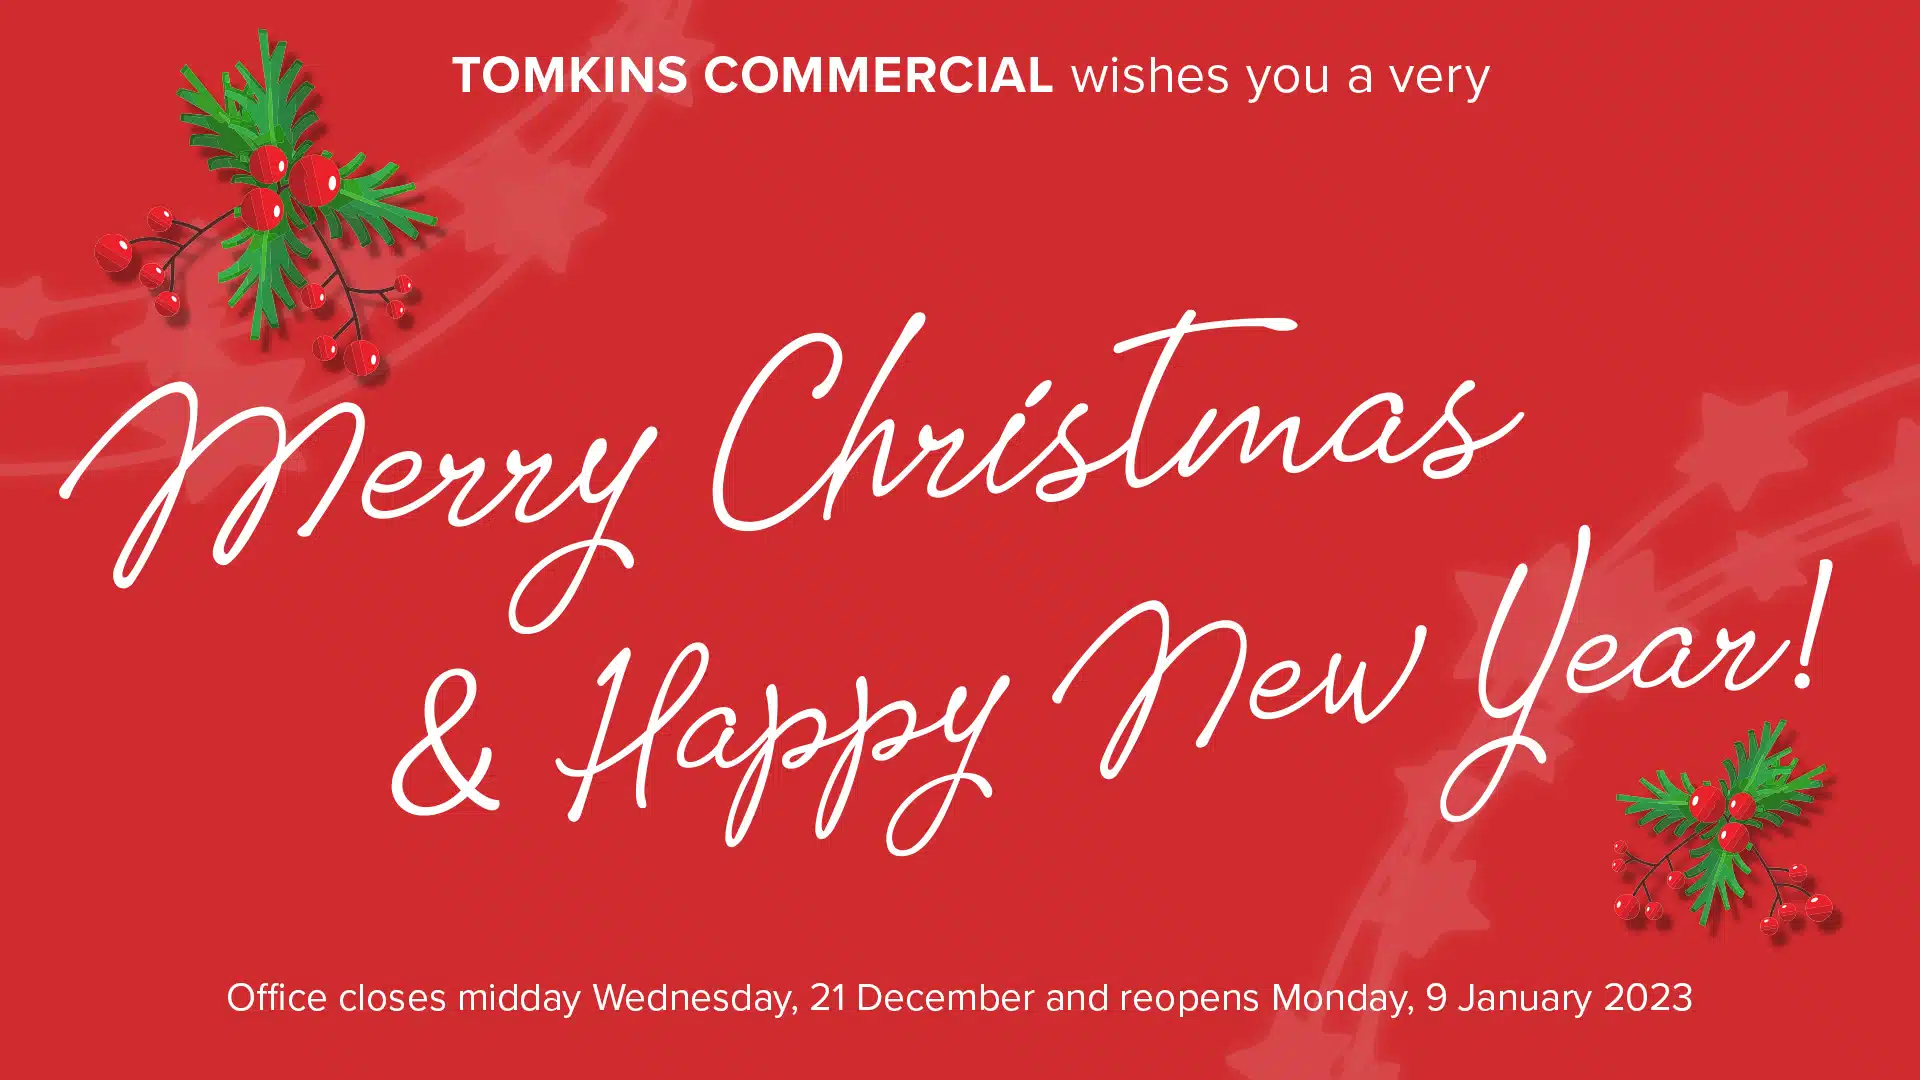 Merry Christmas from Tomkins Commercial